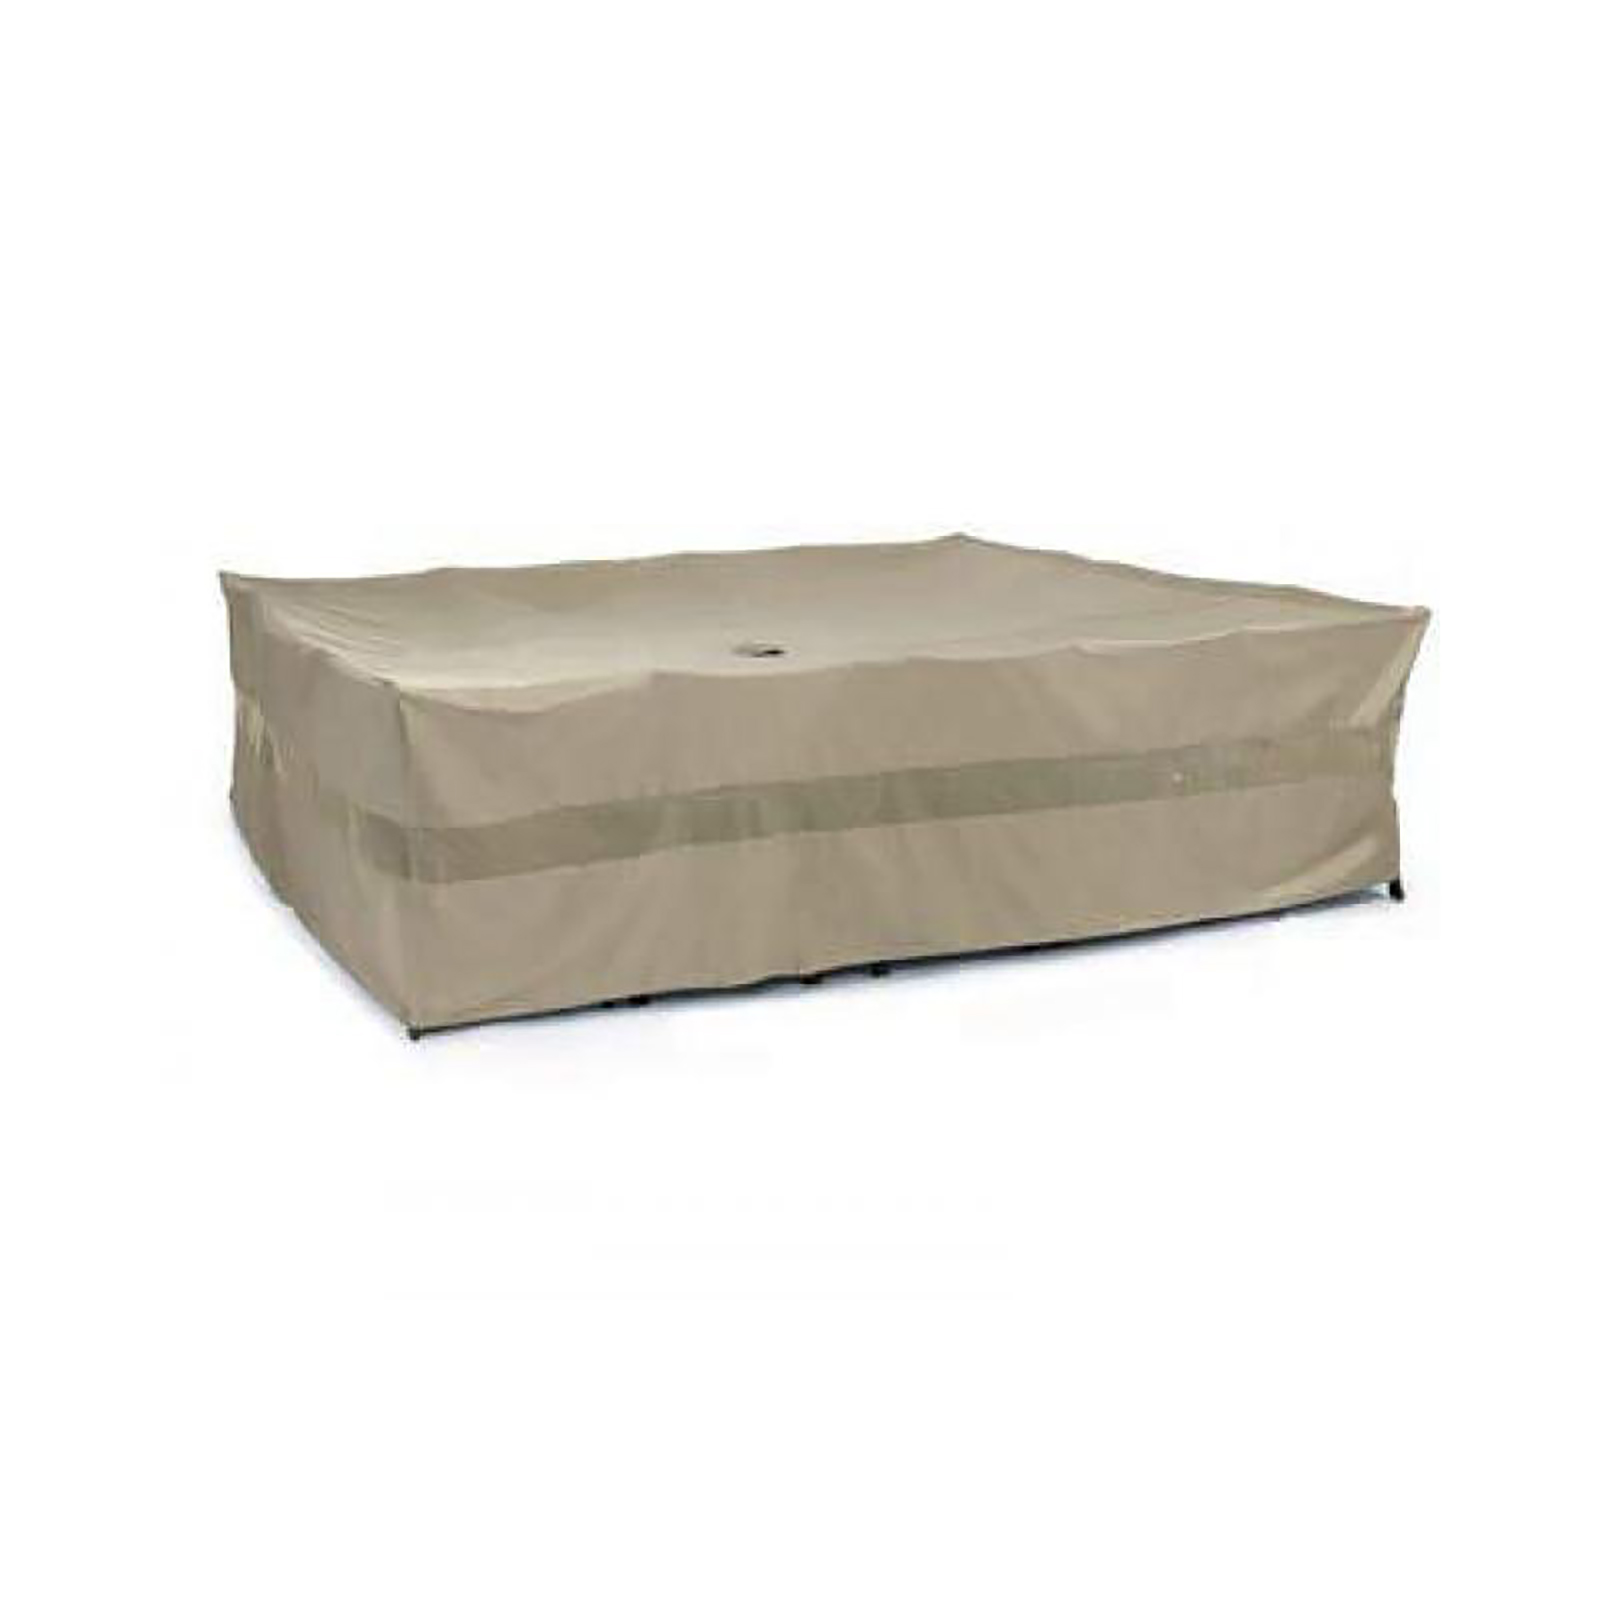 Formosa Covers 120" x 86" Patio Set Cover – Taupe